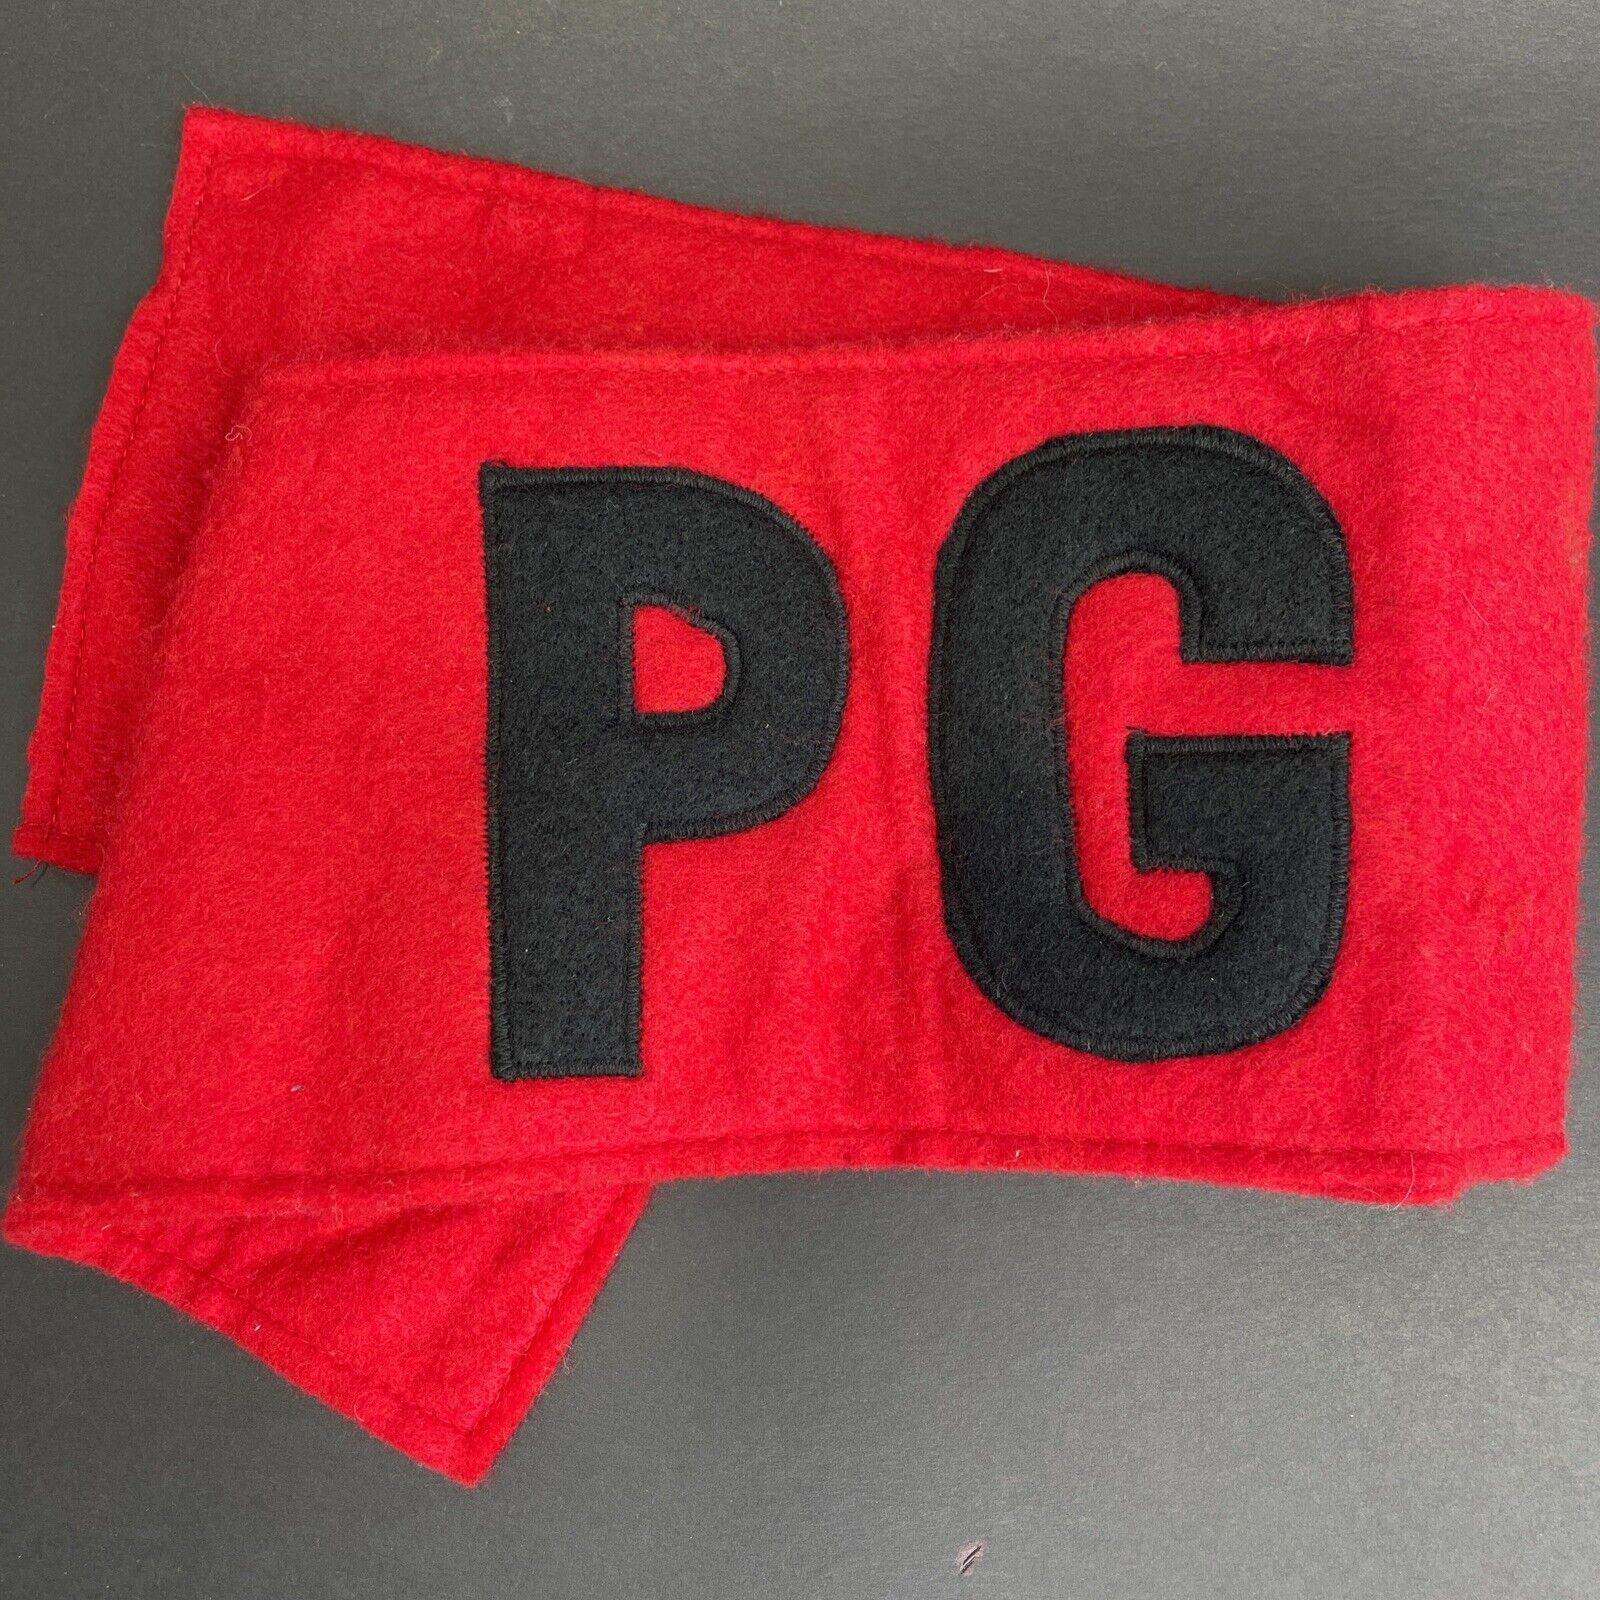 Antique 1930's Partido Galeguista Galicianist Party Spain Galician Wool Arm Band